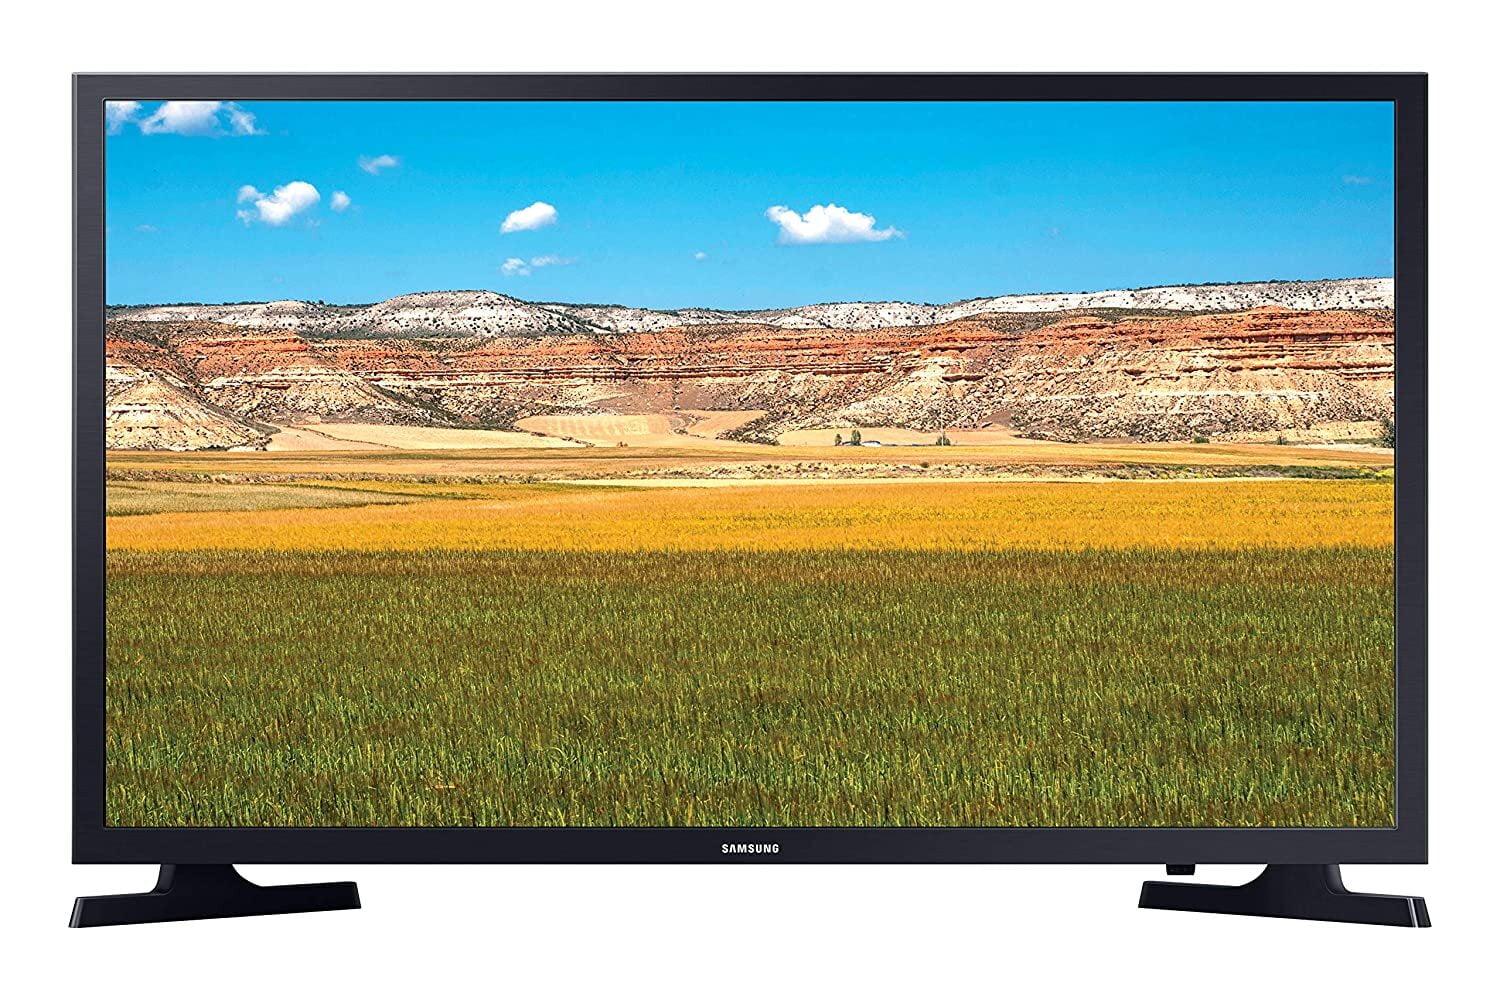 Samsung 32T4500 32 Inches HD Ready Smart LED TV On Dillimall.Com